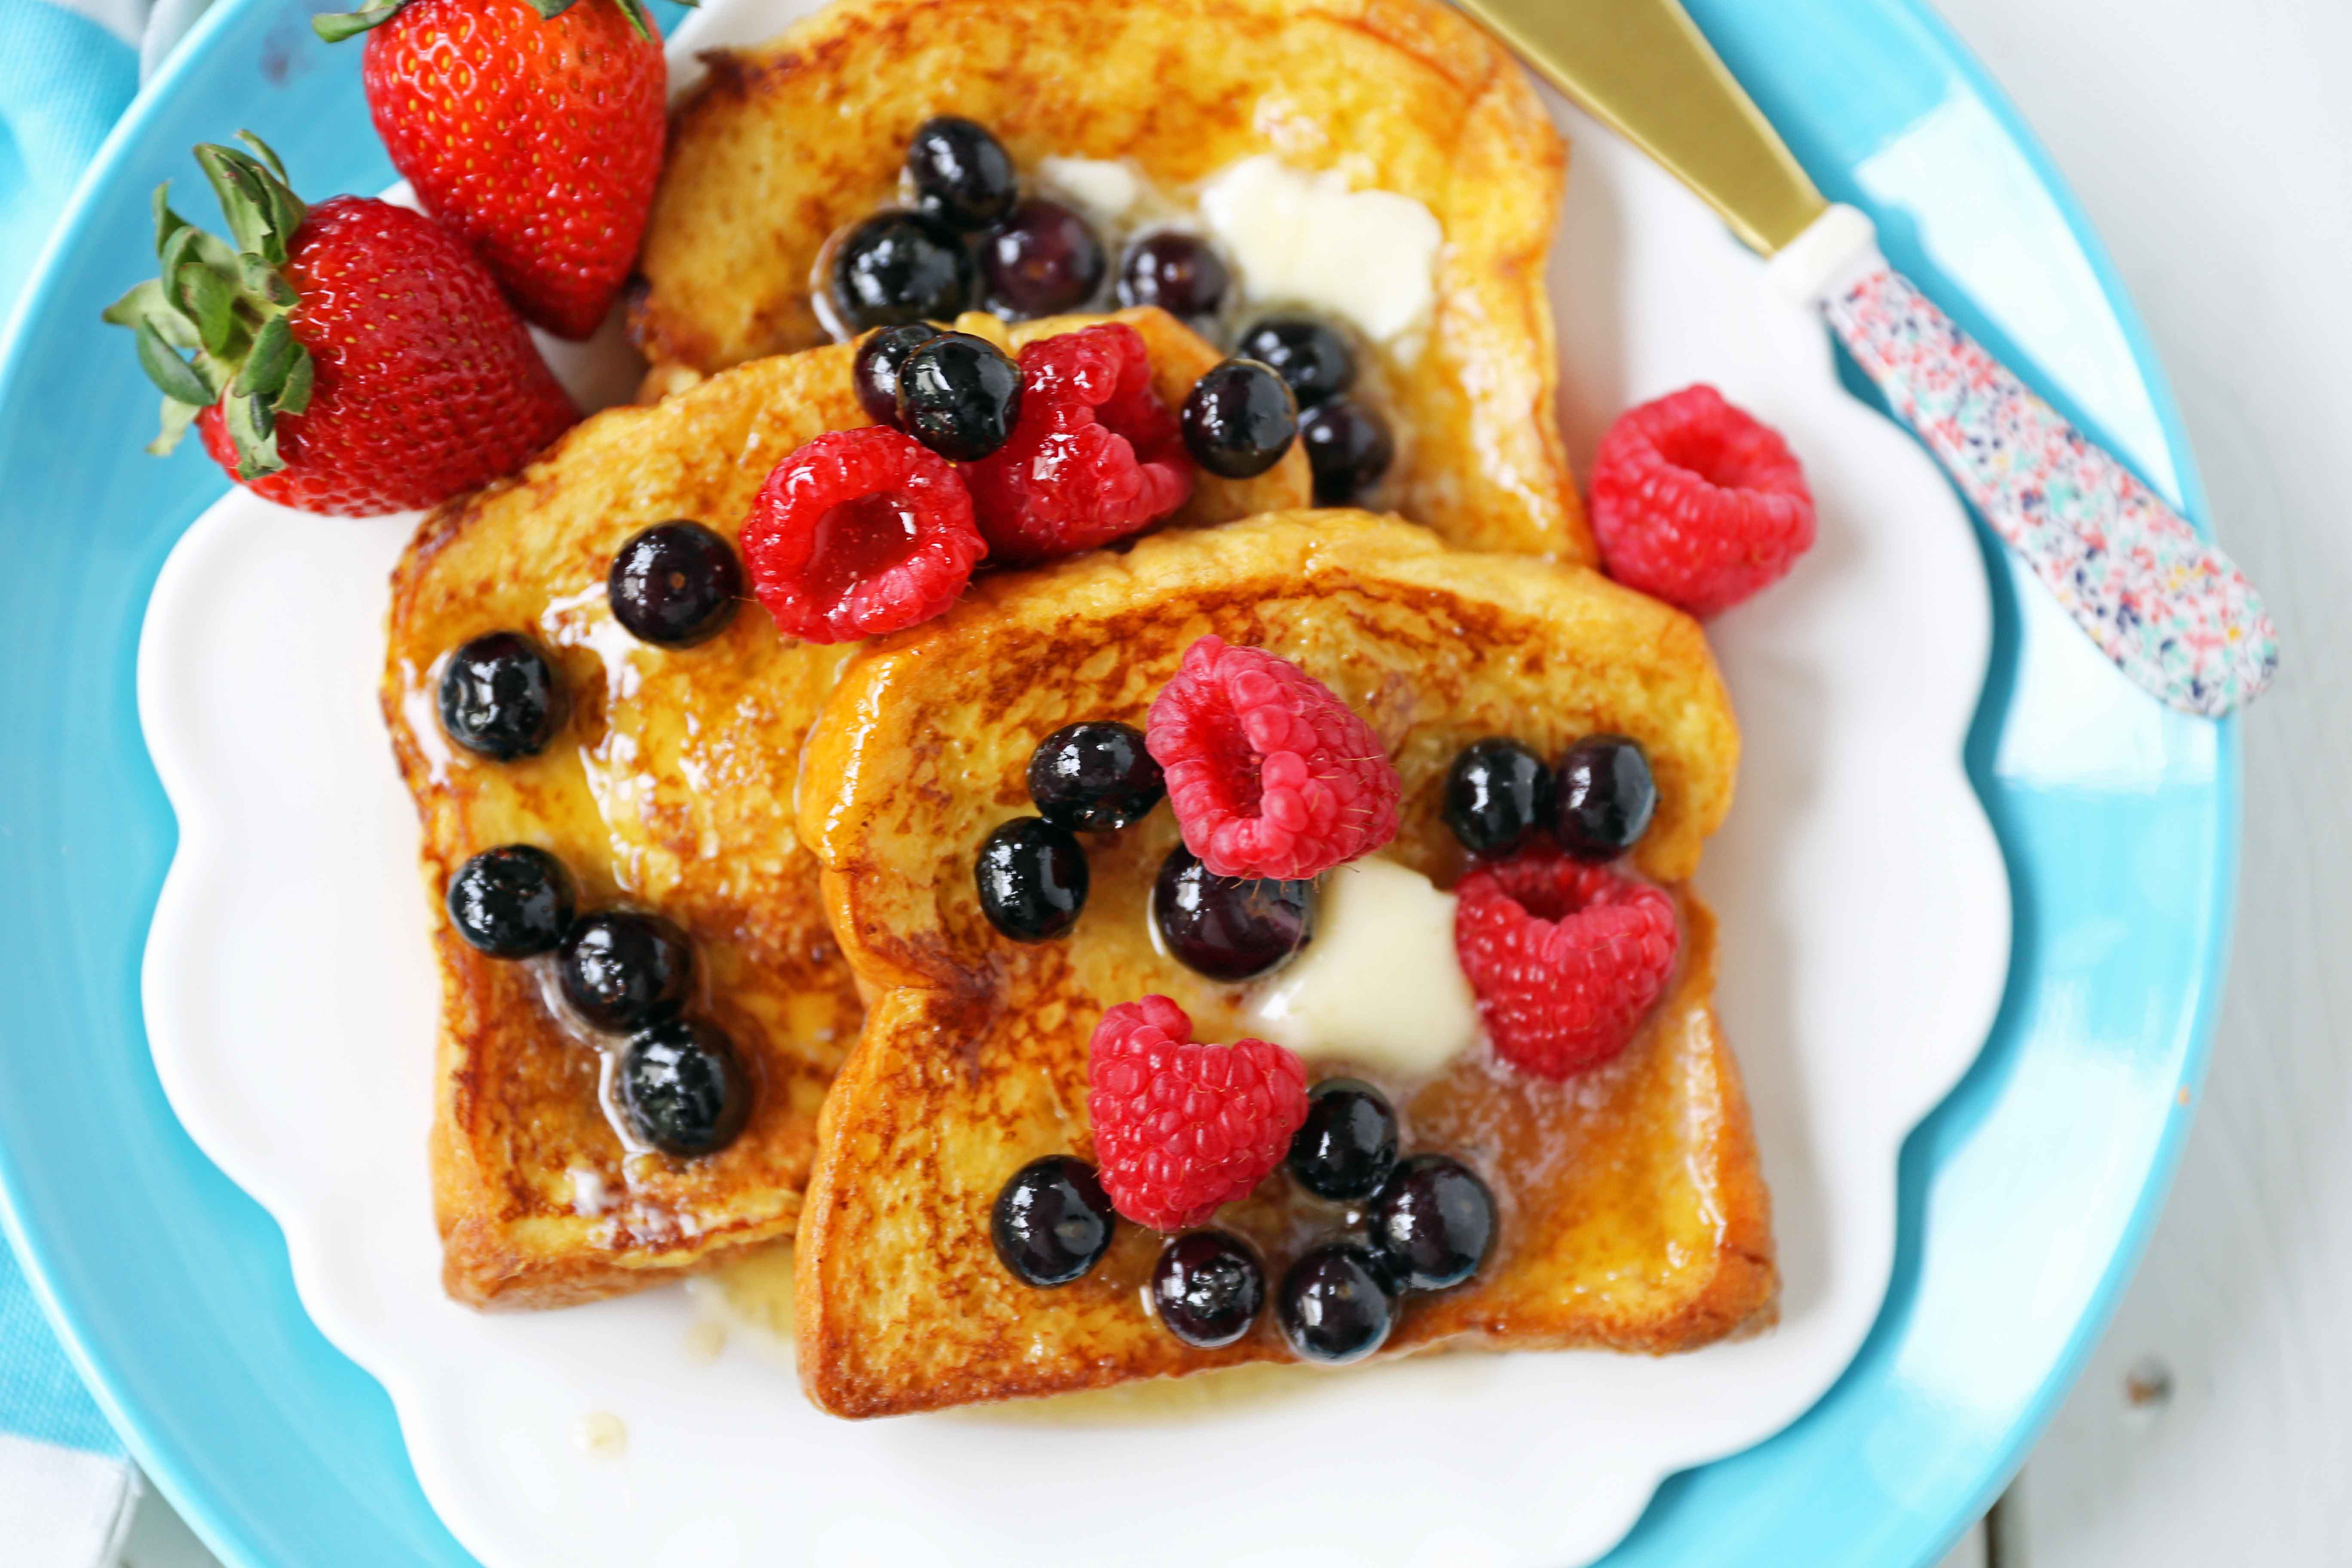 Best French Toast Recipe - How To Make French Toast